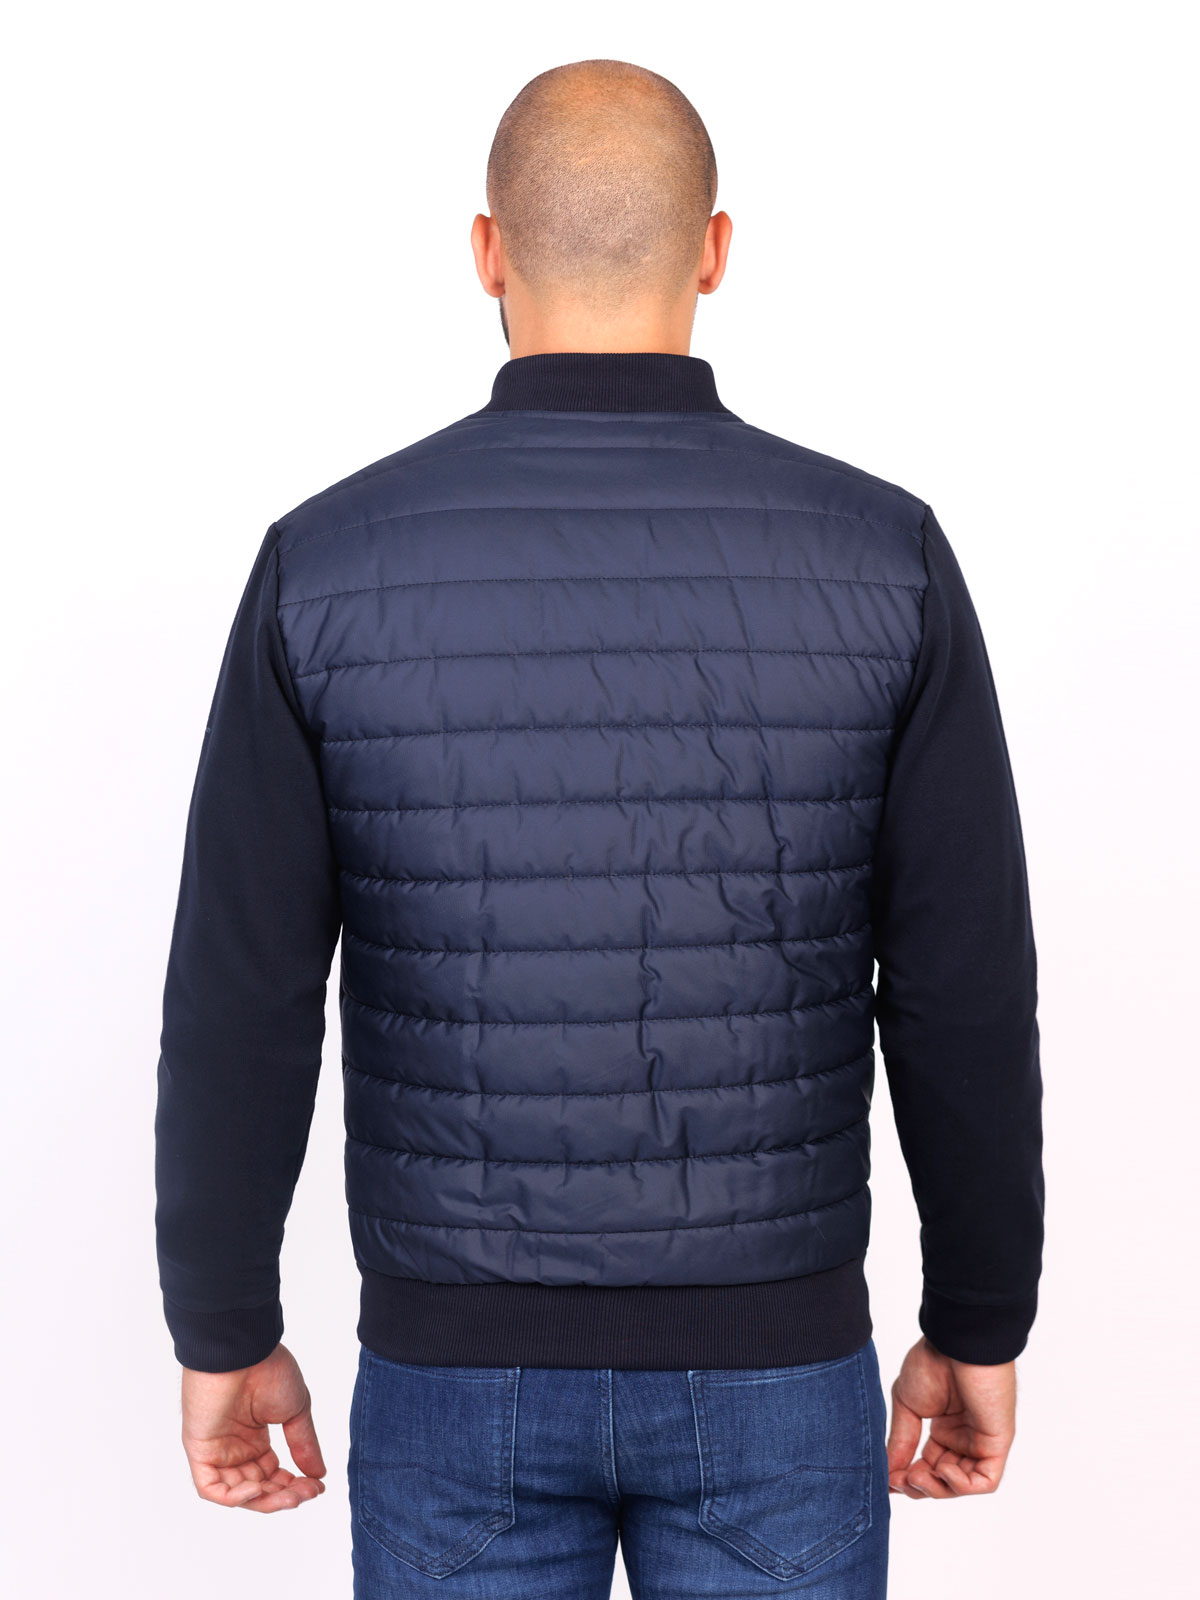 Navy blue quilted sweatshirt - 28122 € 66.37 img2